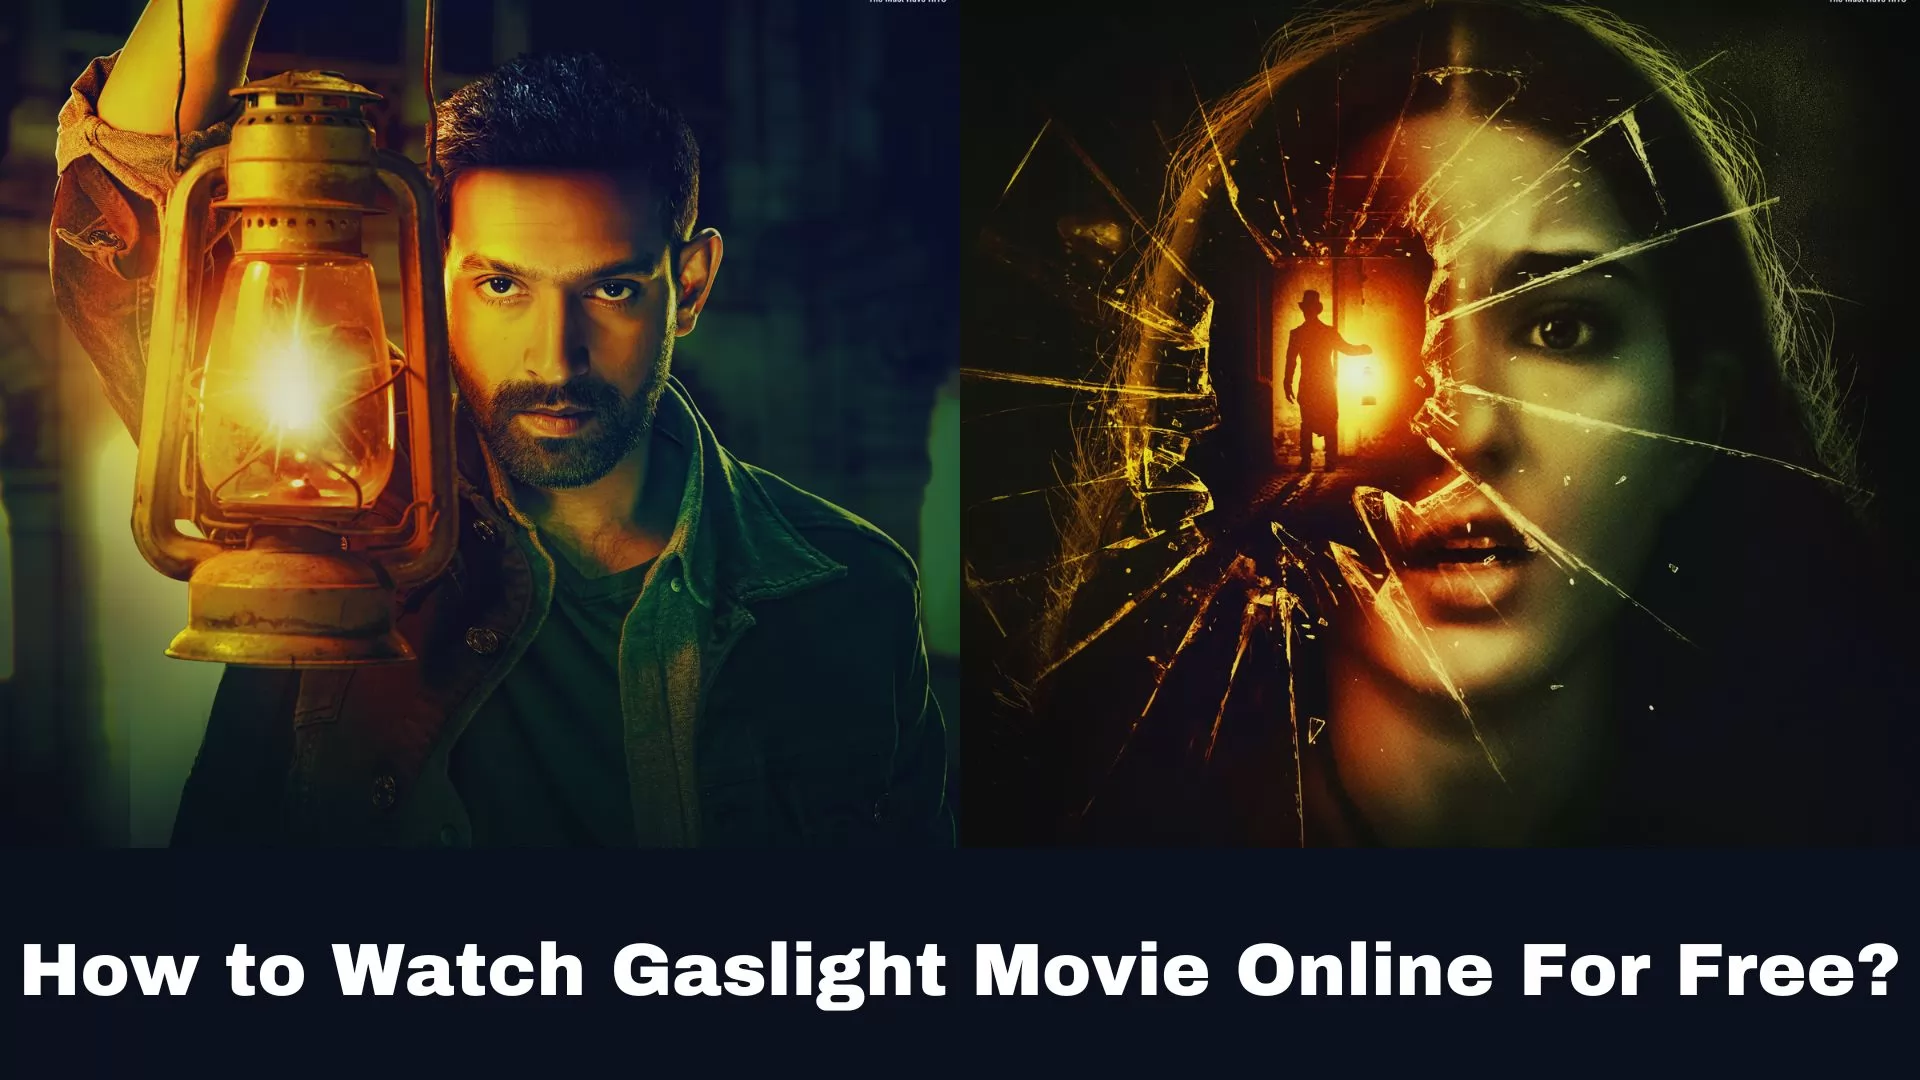 How to Watch Gaslight Movie Online For Free?